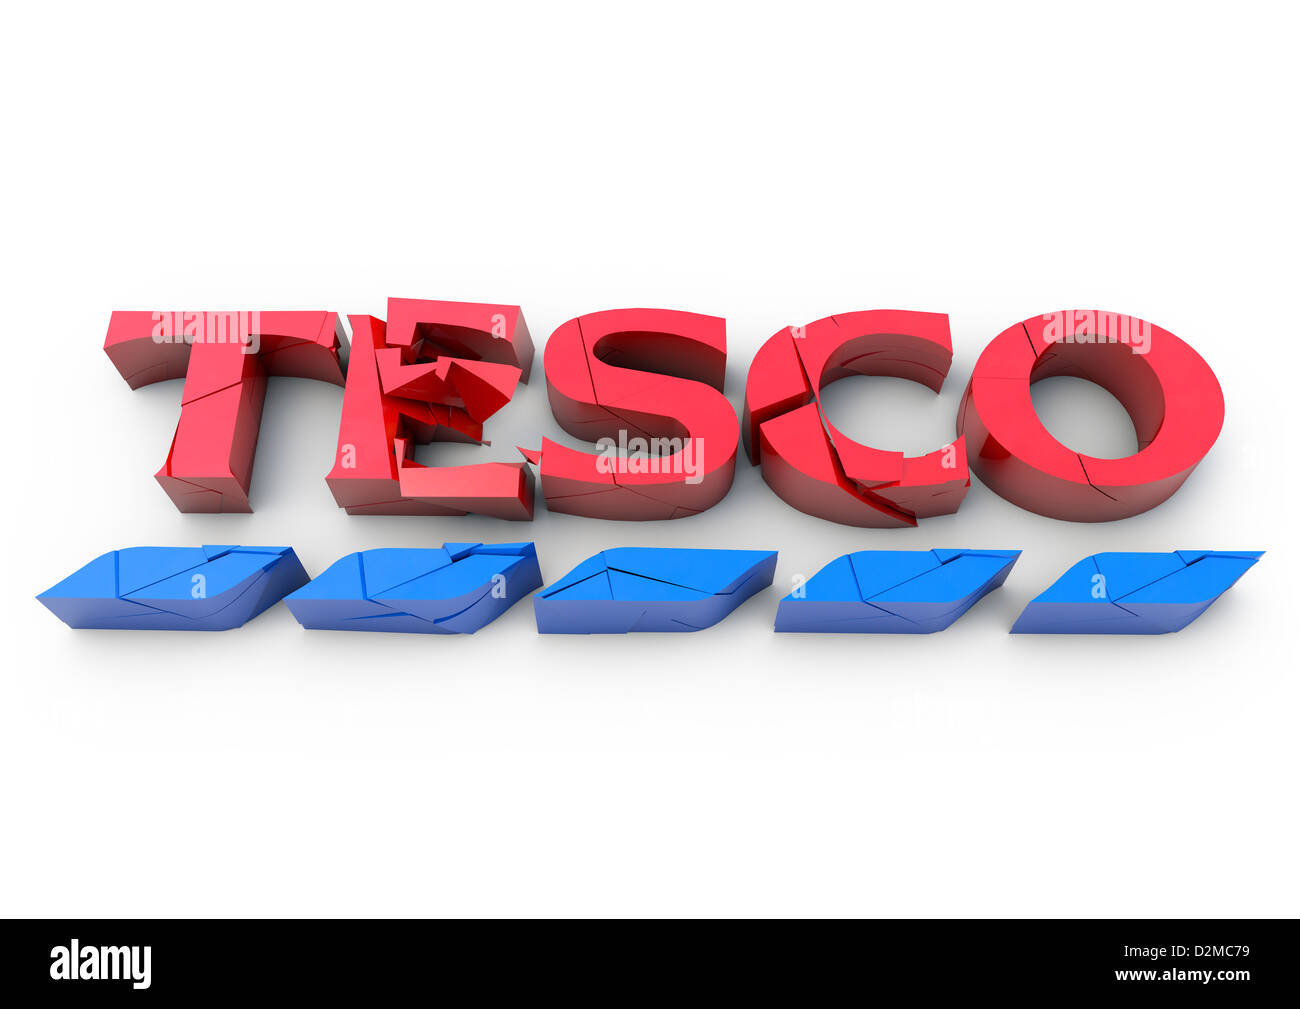 Cracking and crumbling TESCO logo - Business / retail / high street / financial issues / market share concept image Stock Photo